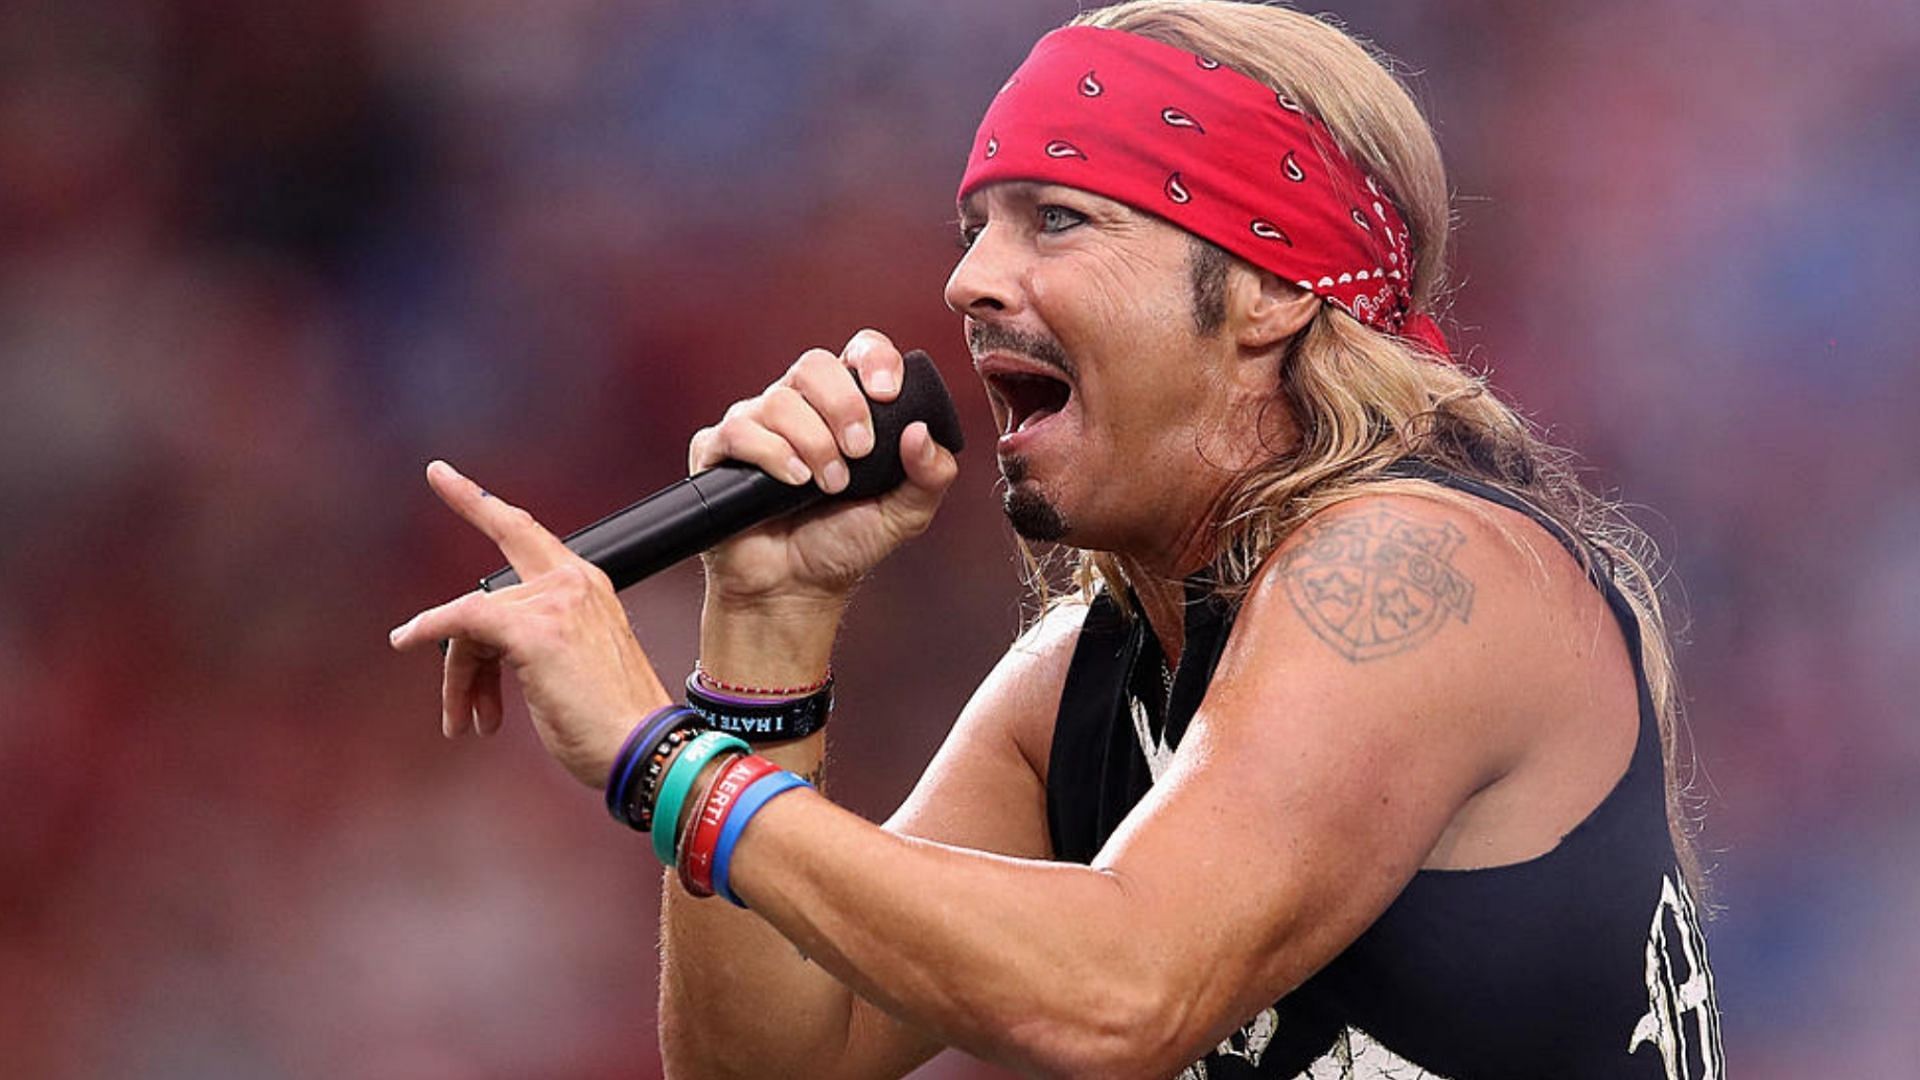 Bret Michaels will hit the road in July next year. (Image via Getty)